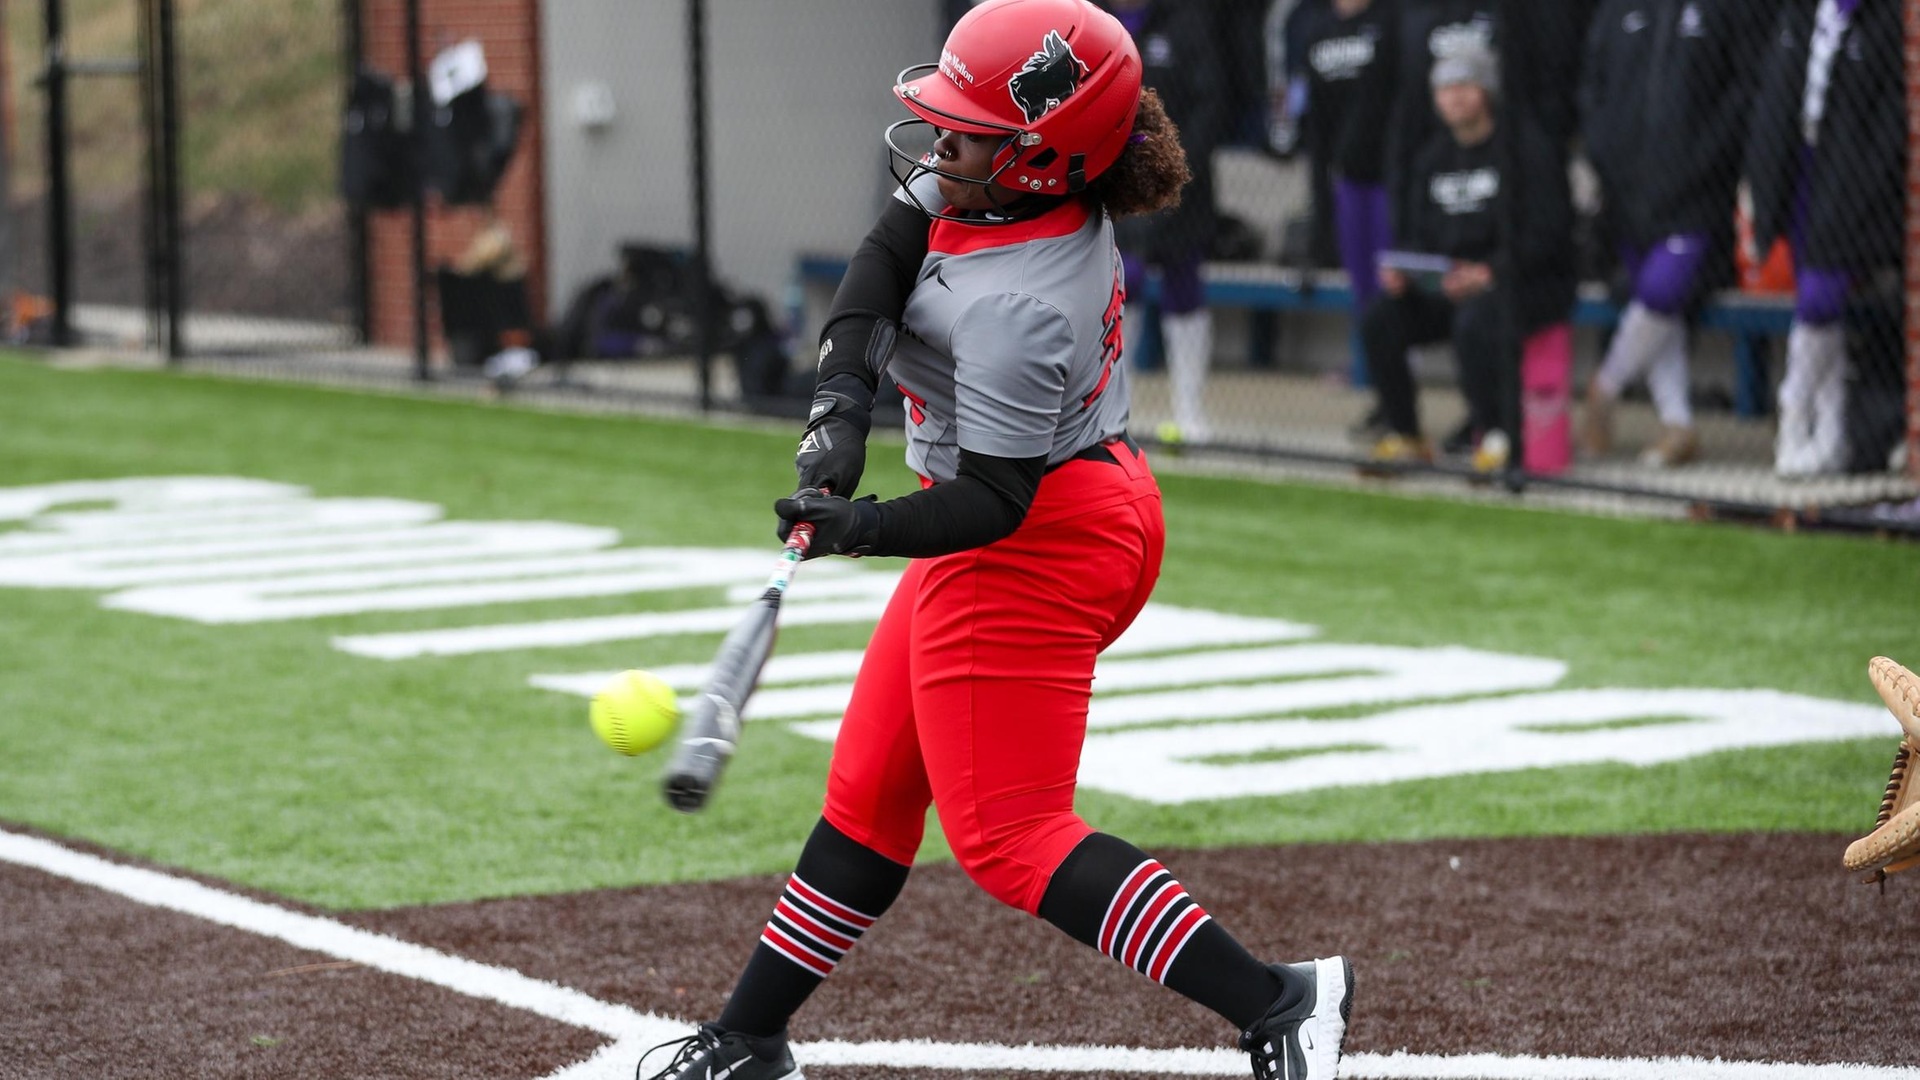 women's softball player batting left-handed and swinging the bat to meet the ball